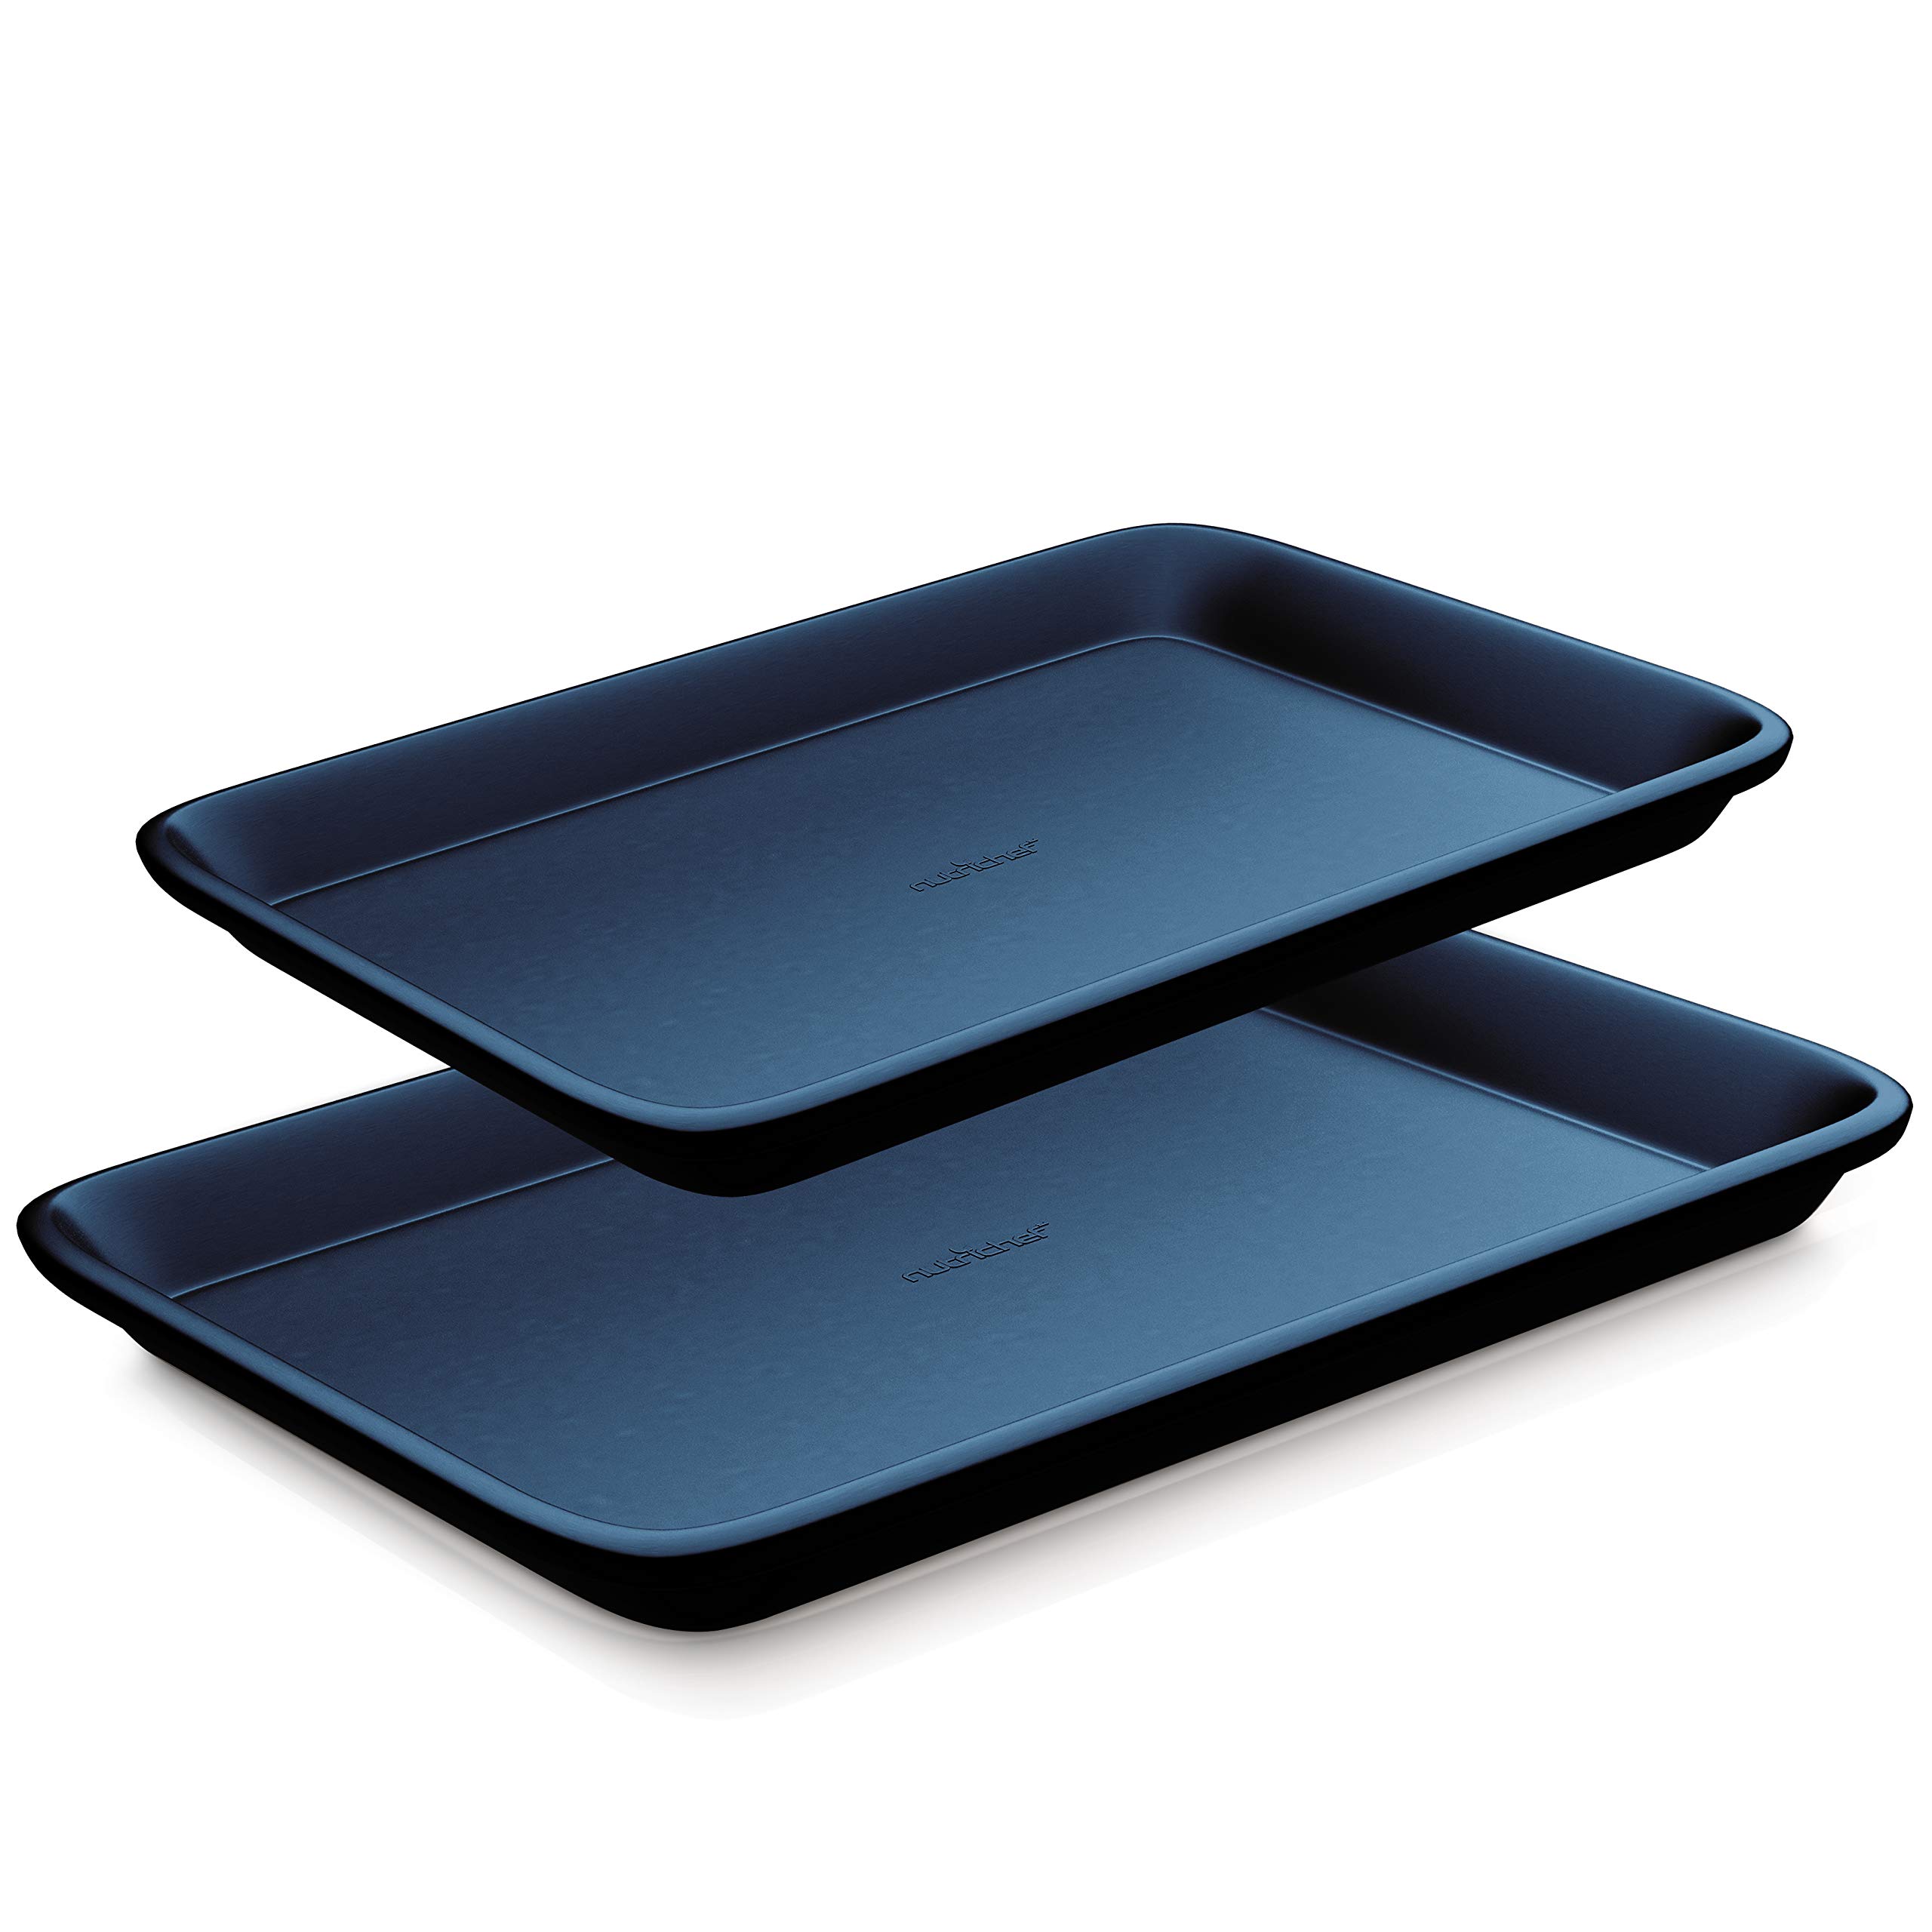 NutriChef Non-Stick Cookie Sheet Baking Pans - 2-Pc. Professional Quality Kitchen Cooking Non-Stick Bake Trays w/ Blue Diamond Coating Inside & Outside, Dishwasher Safe - NutriChef, One Size